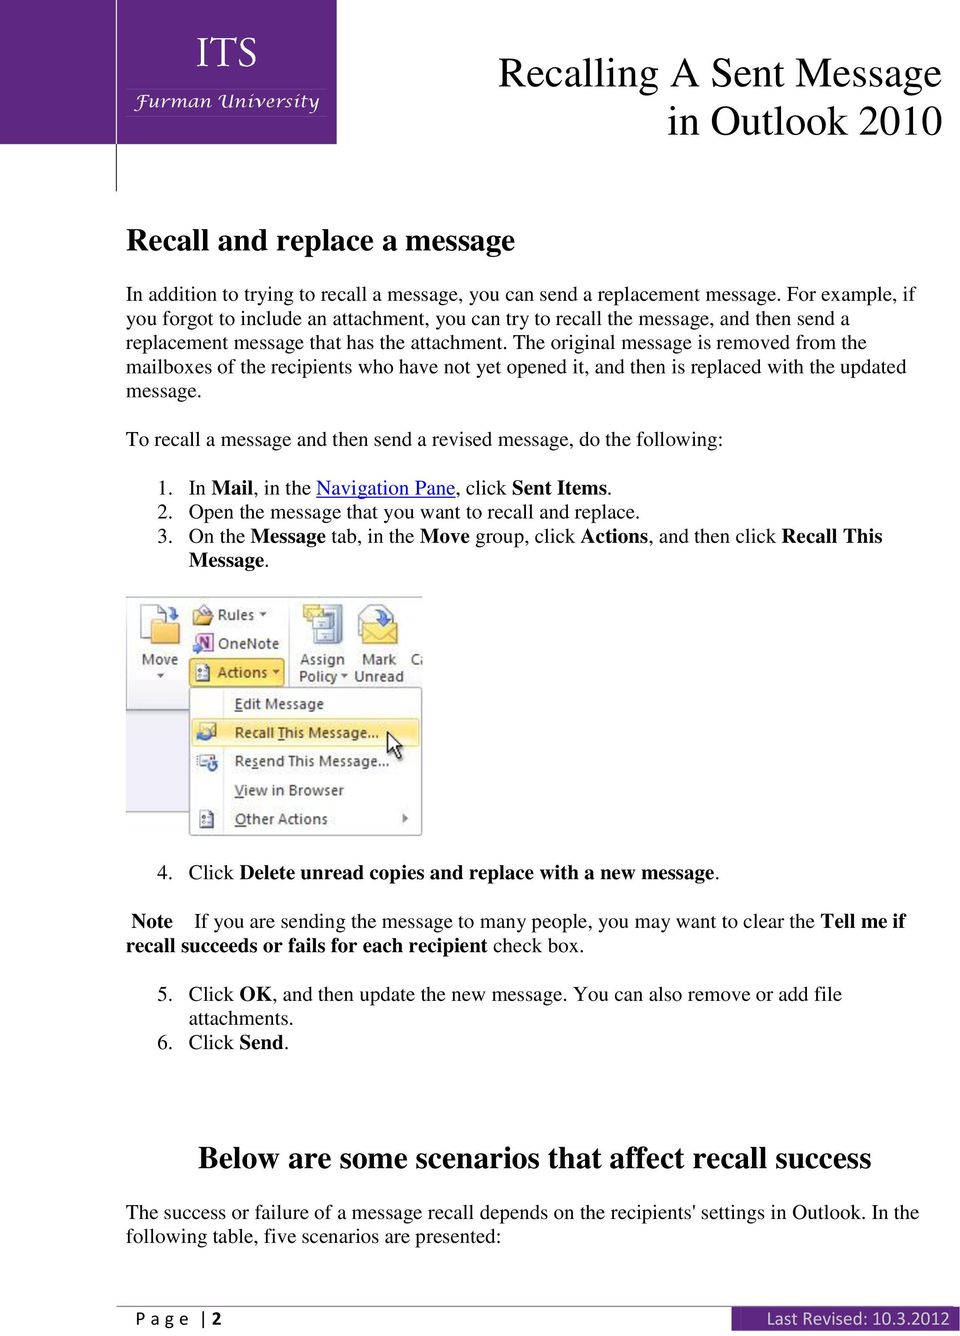 The original message is removed from the mailboxes of the recipients who have not yet opened it, and then is replaced with the updated message.